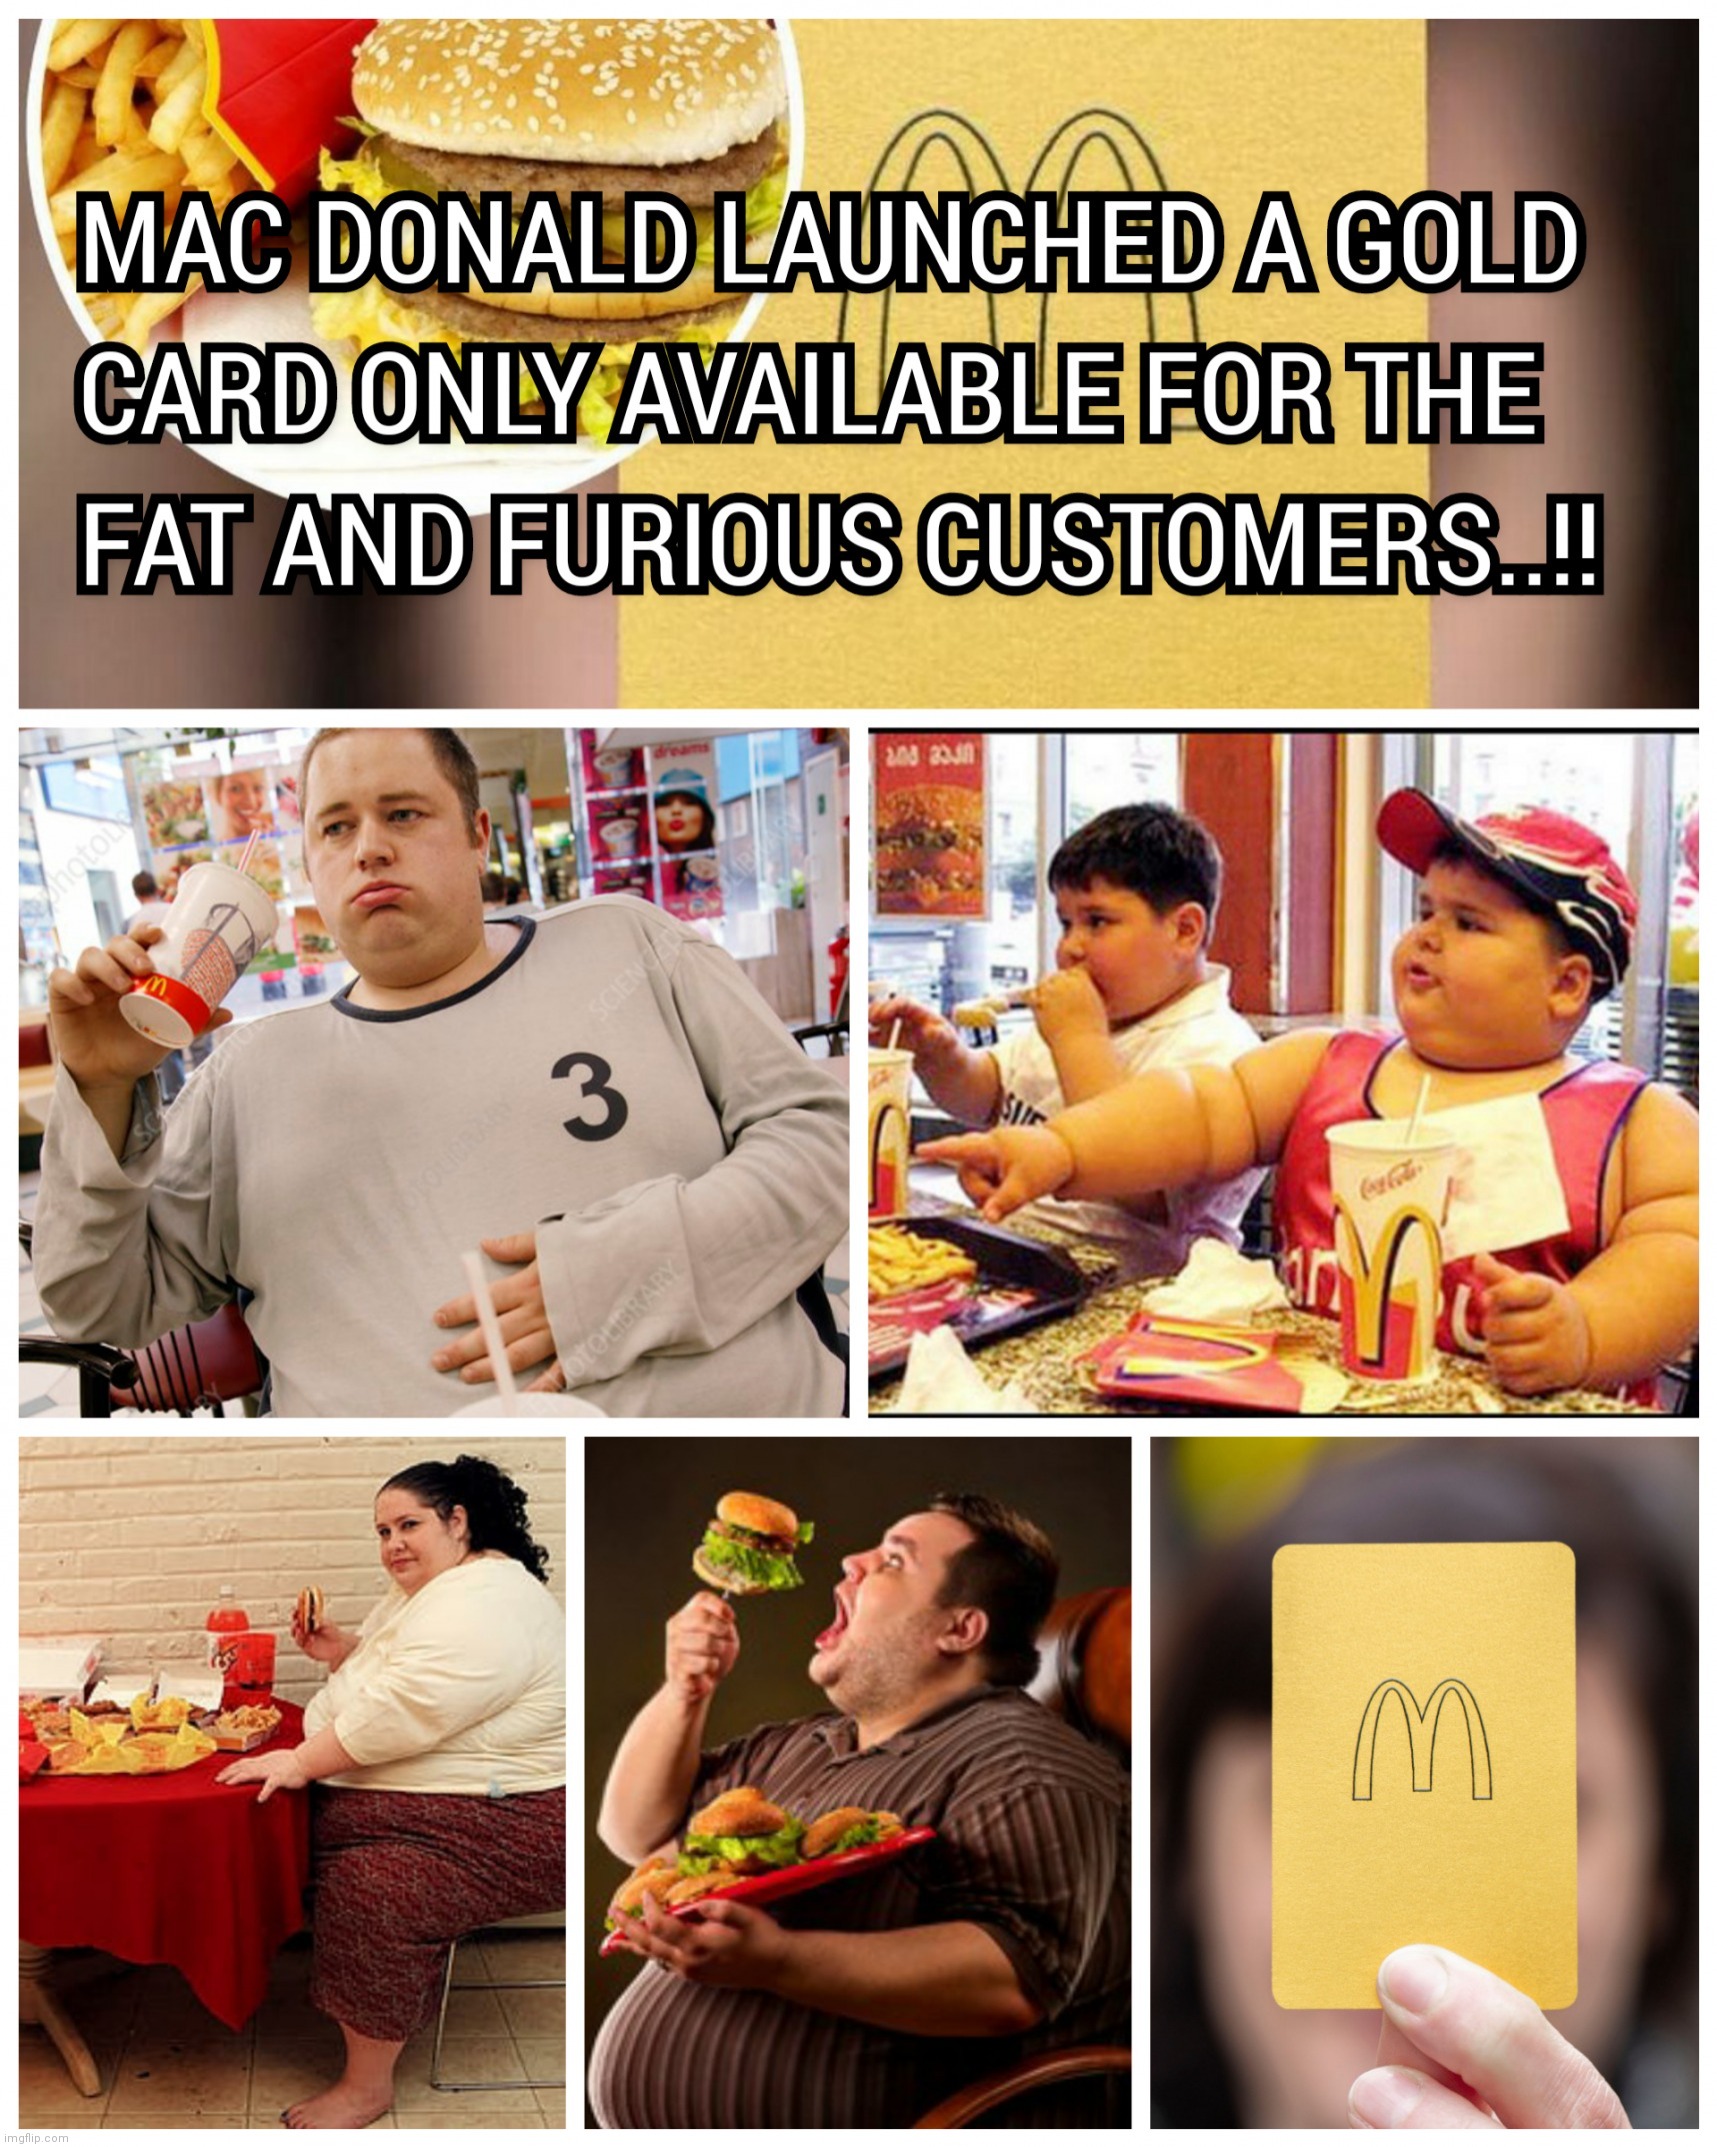 MAC DONALD LAUNCHED A GOLD CARD ONLY AVAILABLE FOR THE FAT AND FURIOUS CUSTOMERS..!! | image tagged in mac donald,gold,cards,obesity,fat,memes | made w/ Imgflip meme maker